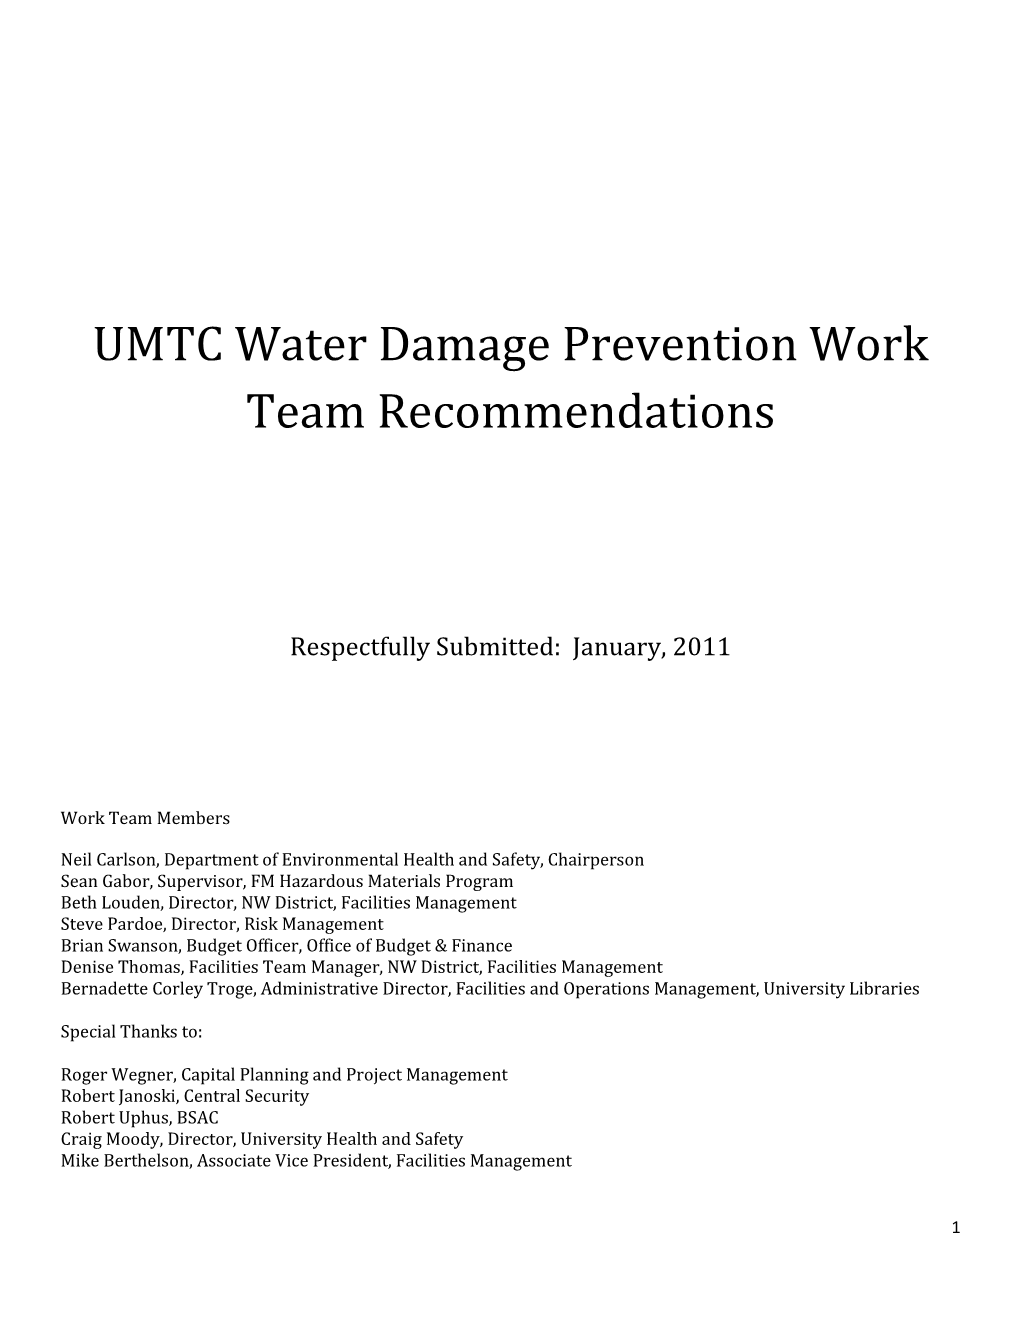 UMTC Water Damage Prevention Work Team Recommendations